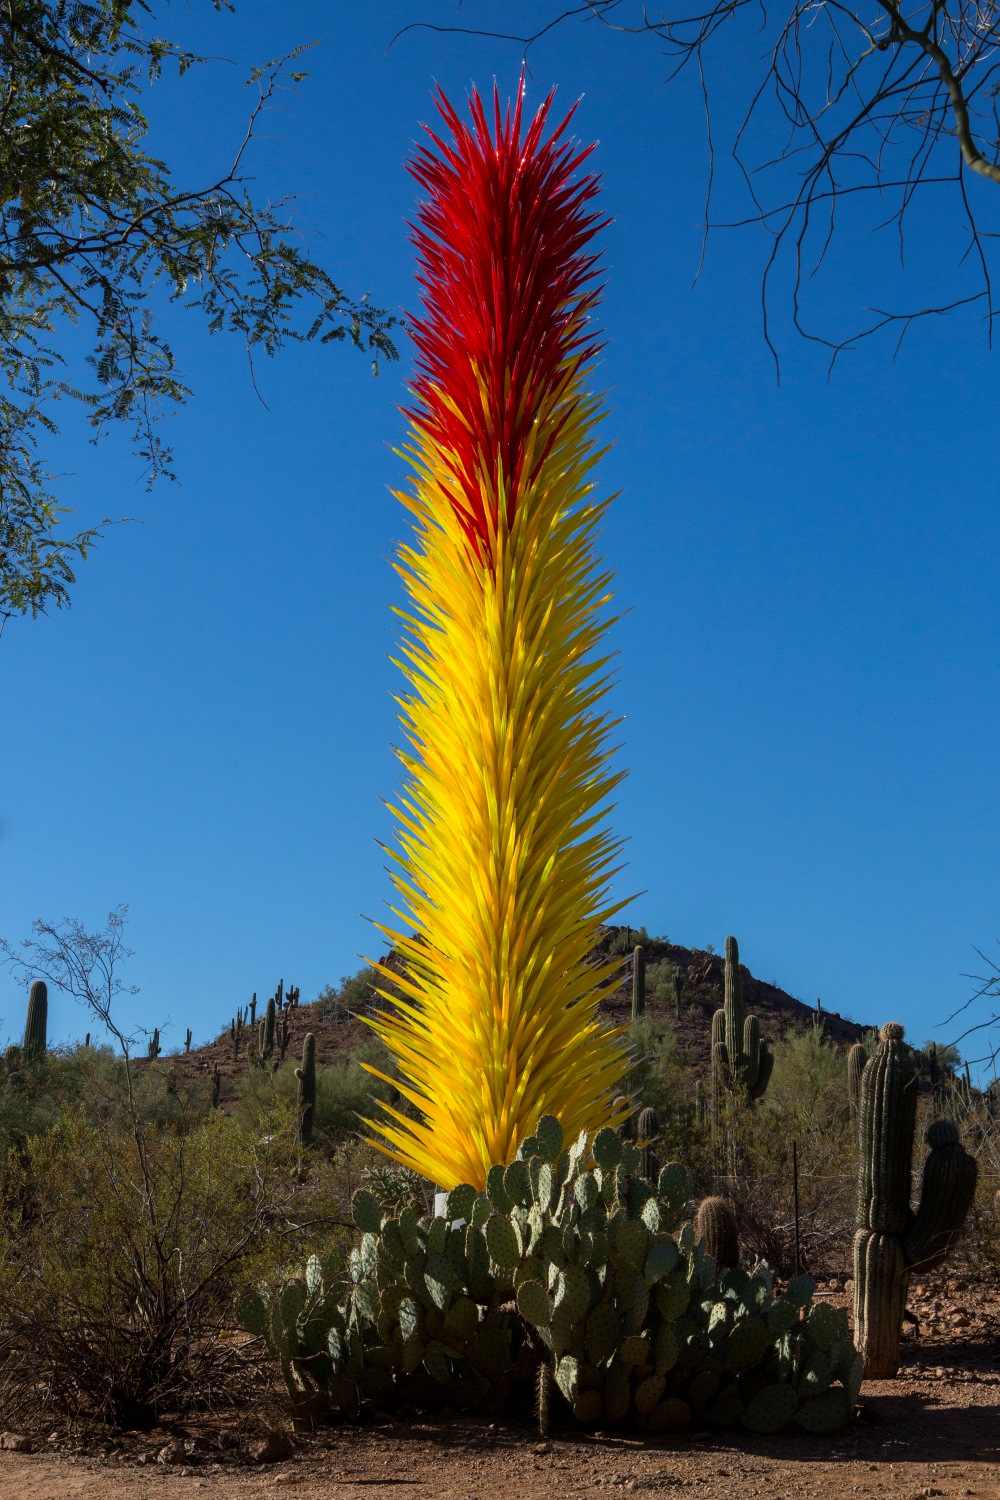 Dale Chihuly, Scarlet and Yellow Icicle Tower, 2013 33½ x 7 x 7'